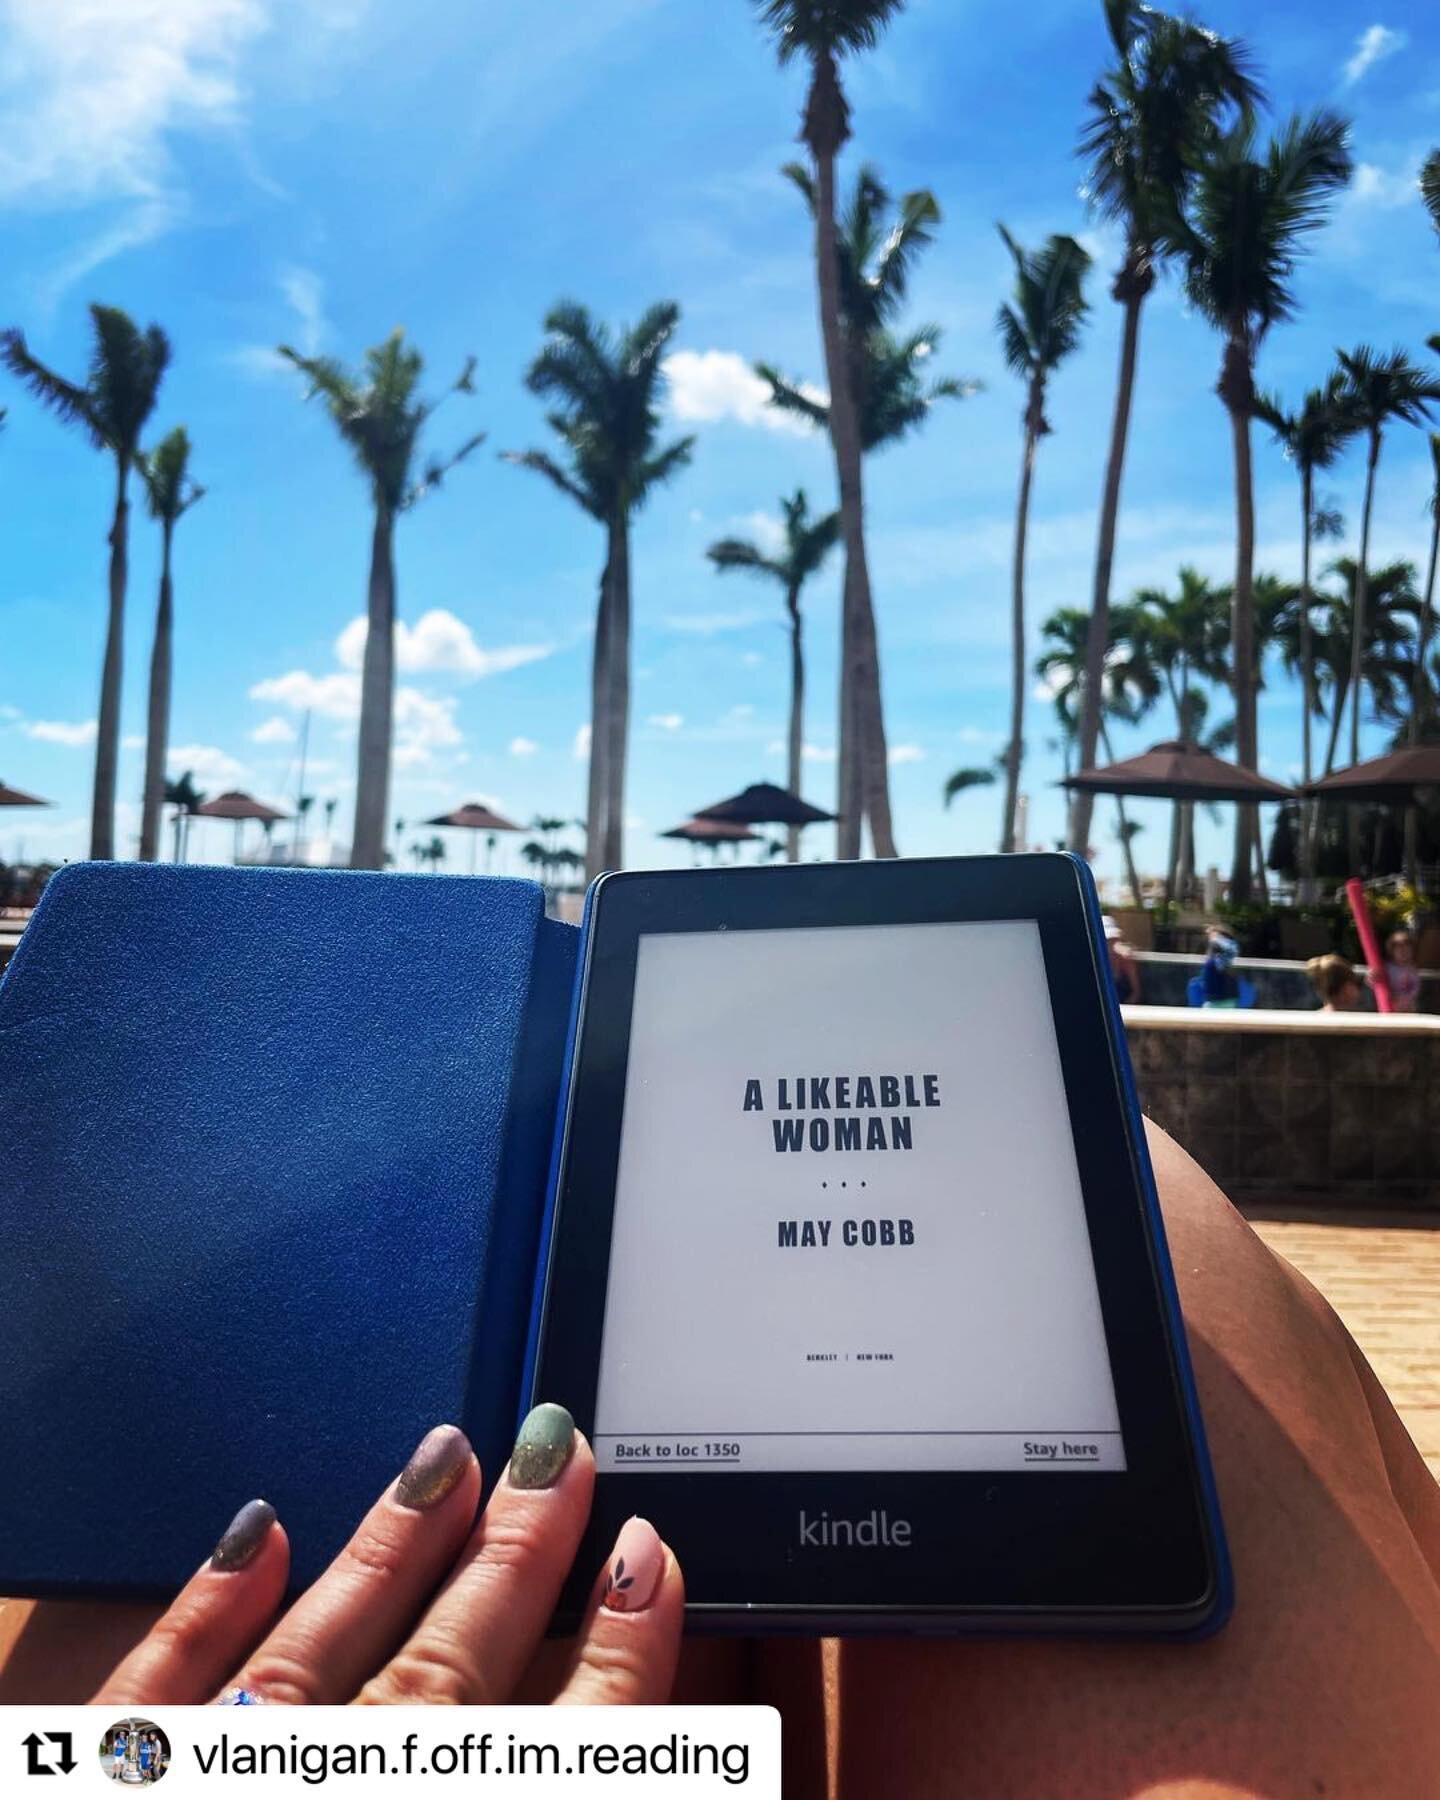 Thanks so very much to the fabulous @vlanigan.f.off.im.reading for this post about A LIKEABLE WOMAN! 😎🌴🏝👙#alikeablewoman 

#Repost @vlanigan.f.off.im.reading with @use.repost
・・・
Wishing I was still on vacation with Sunshine and my fave @may_cobb